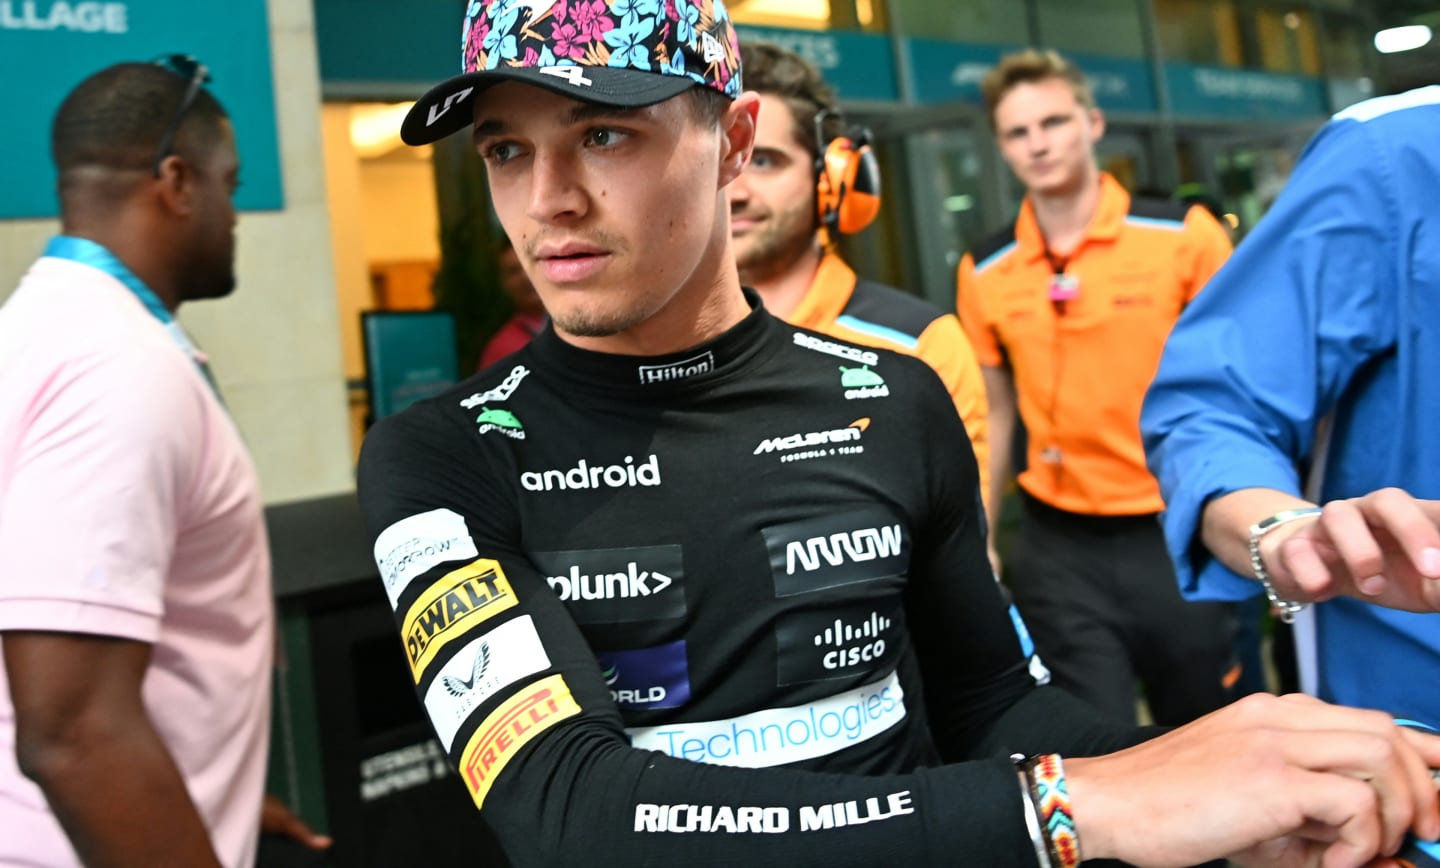 McLaren's British driver Lando Norris heads to the garage before the 2023 Miami Formula One Grand Prix at the Miami International Autodrome in Miami Gardens, Florida, on May 7, 2023. (Photo by CHANDAN KHANNA / AFP) (Photo by CHANDAN KHANNA/AFP via Getty Images)